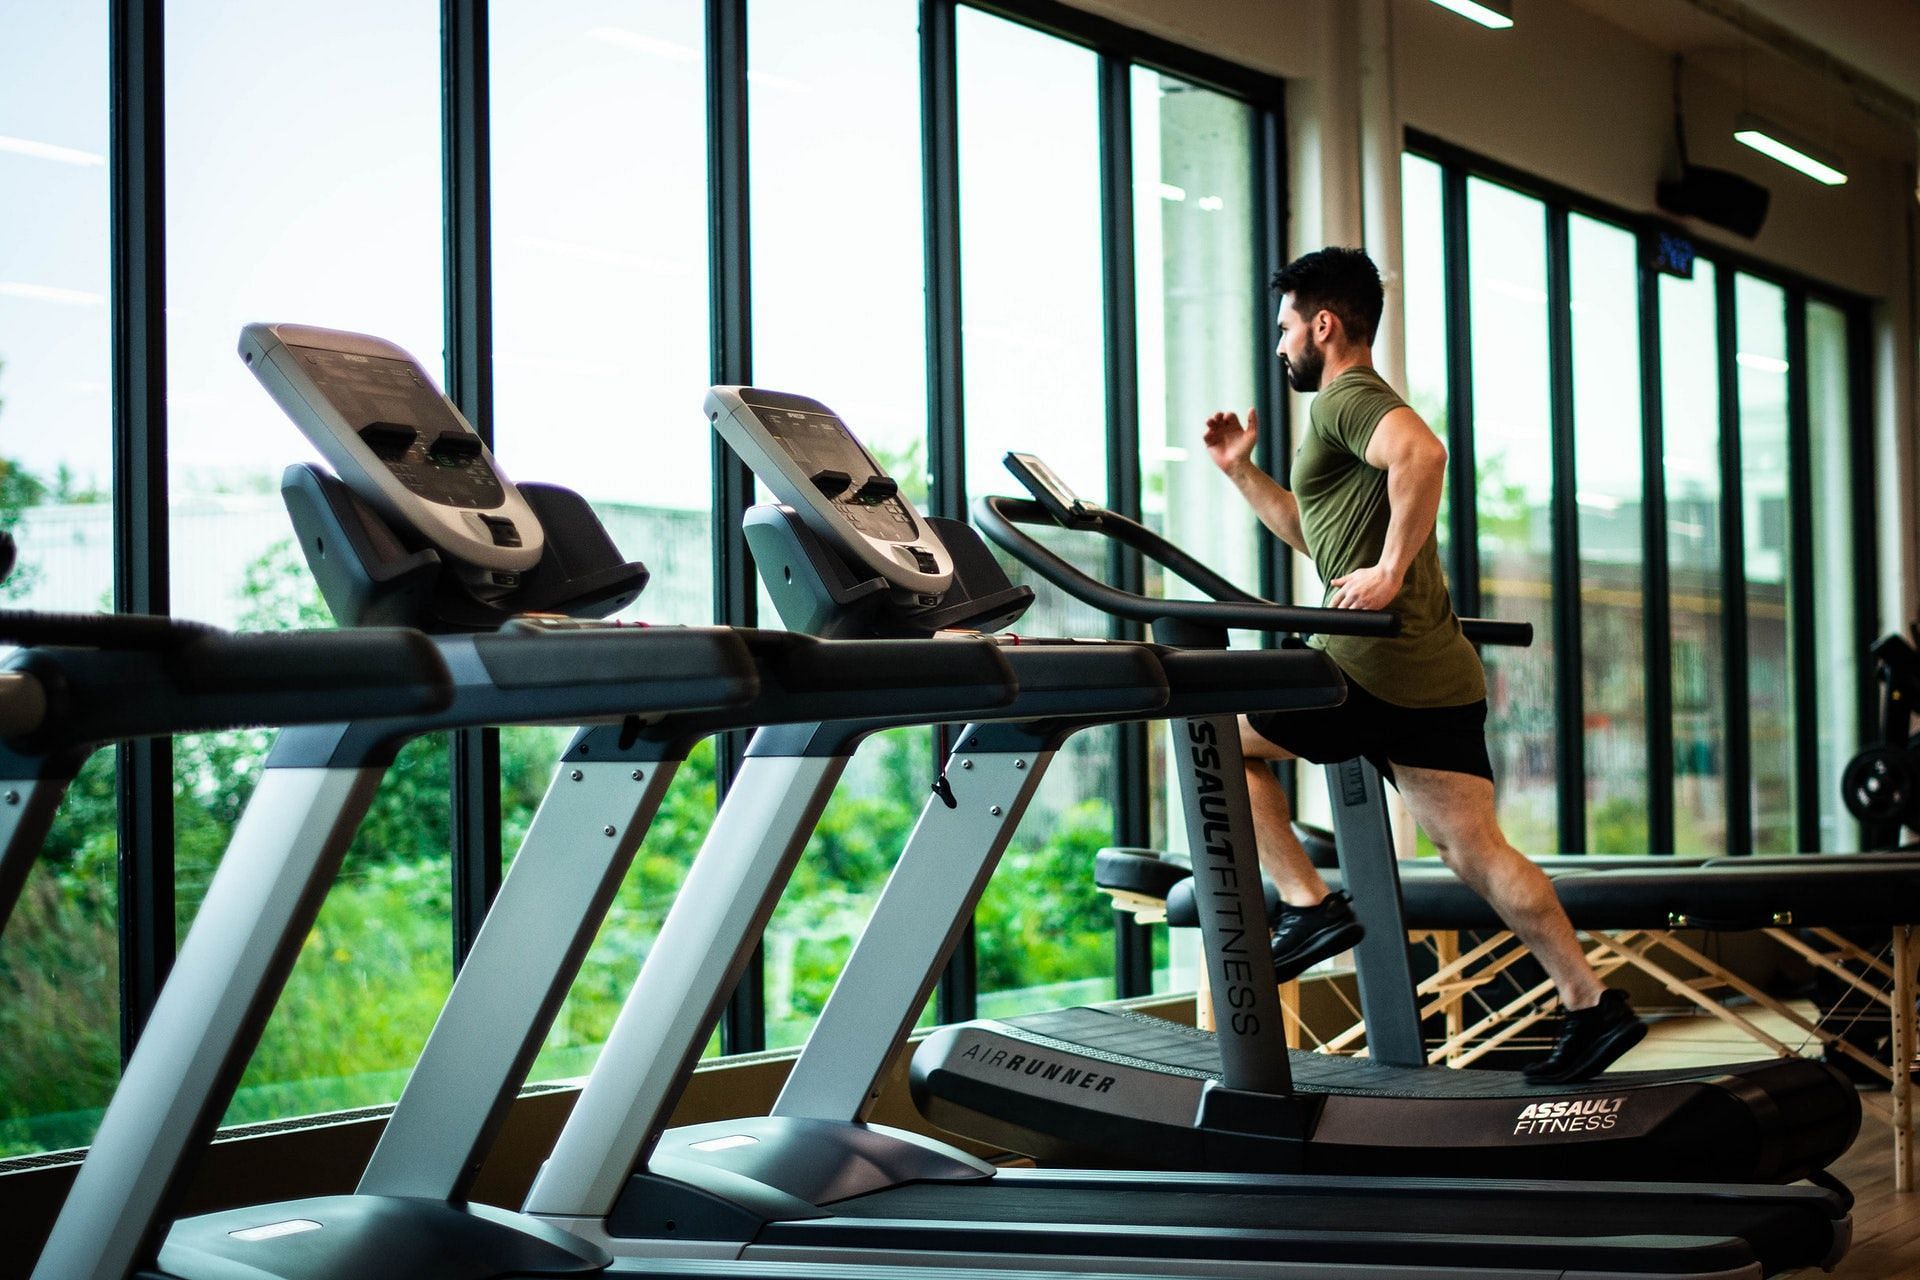 Does fasted cardio actually work? (Image via Pexels/Photo by William Choquette)